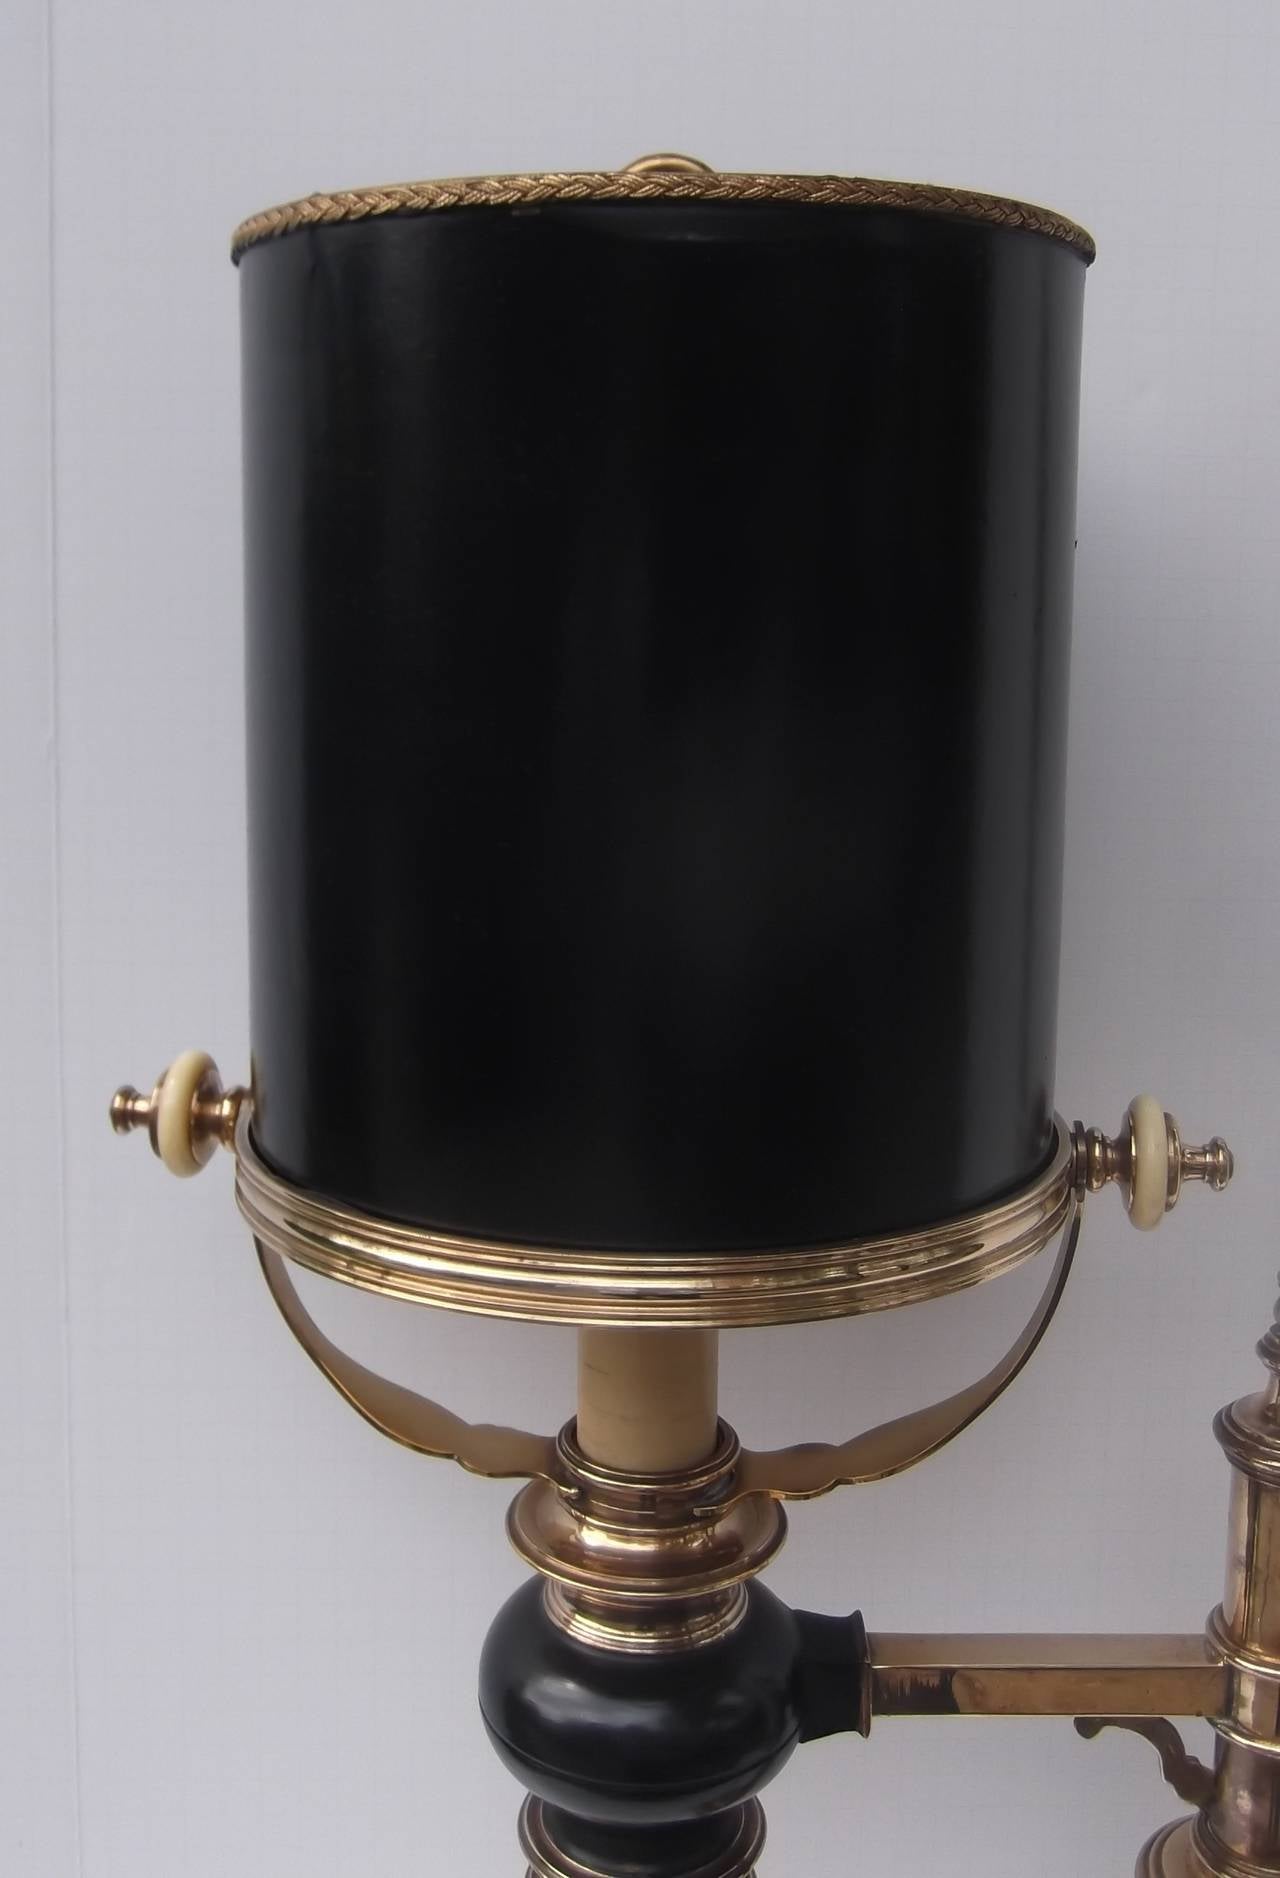 A cast brass and black enameled Chapman desk lamp.
Unusual drum parchment shade (original) fits into the brass ring shade holder with classic Chapman off-white knobs. The tall pole on one side gives this lamp a handsome balance, the square pedestal